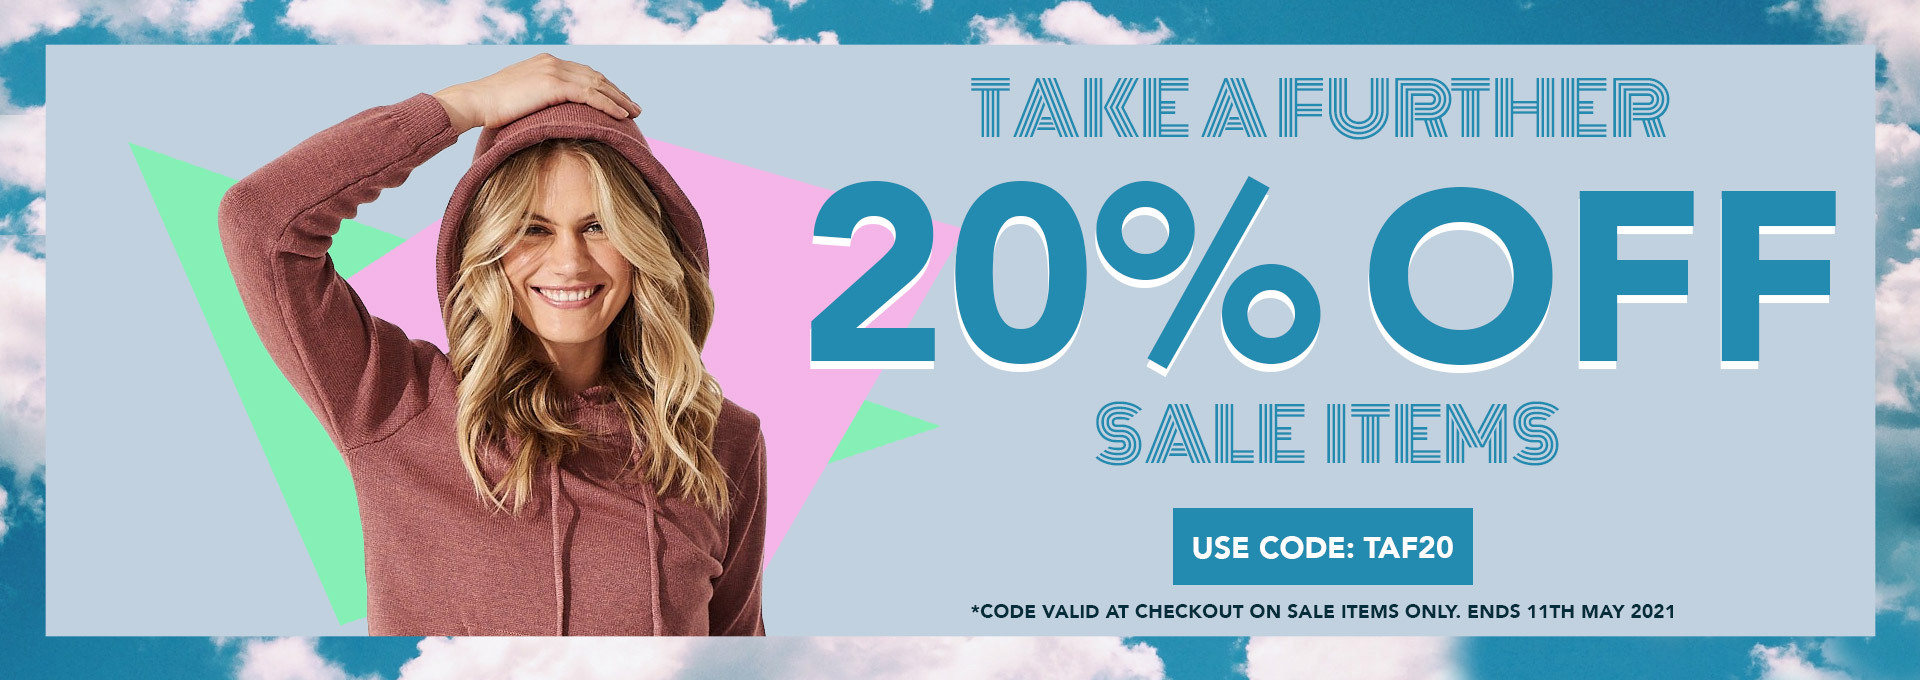 Take a further 20% OFF on sale styles